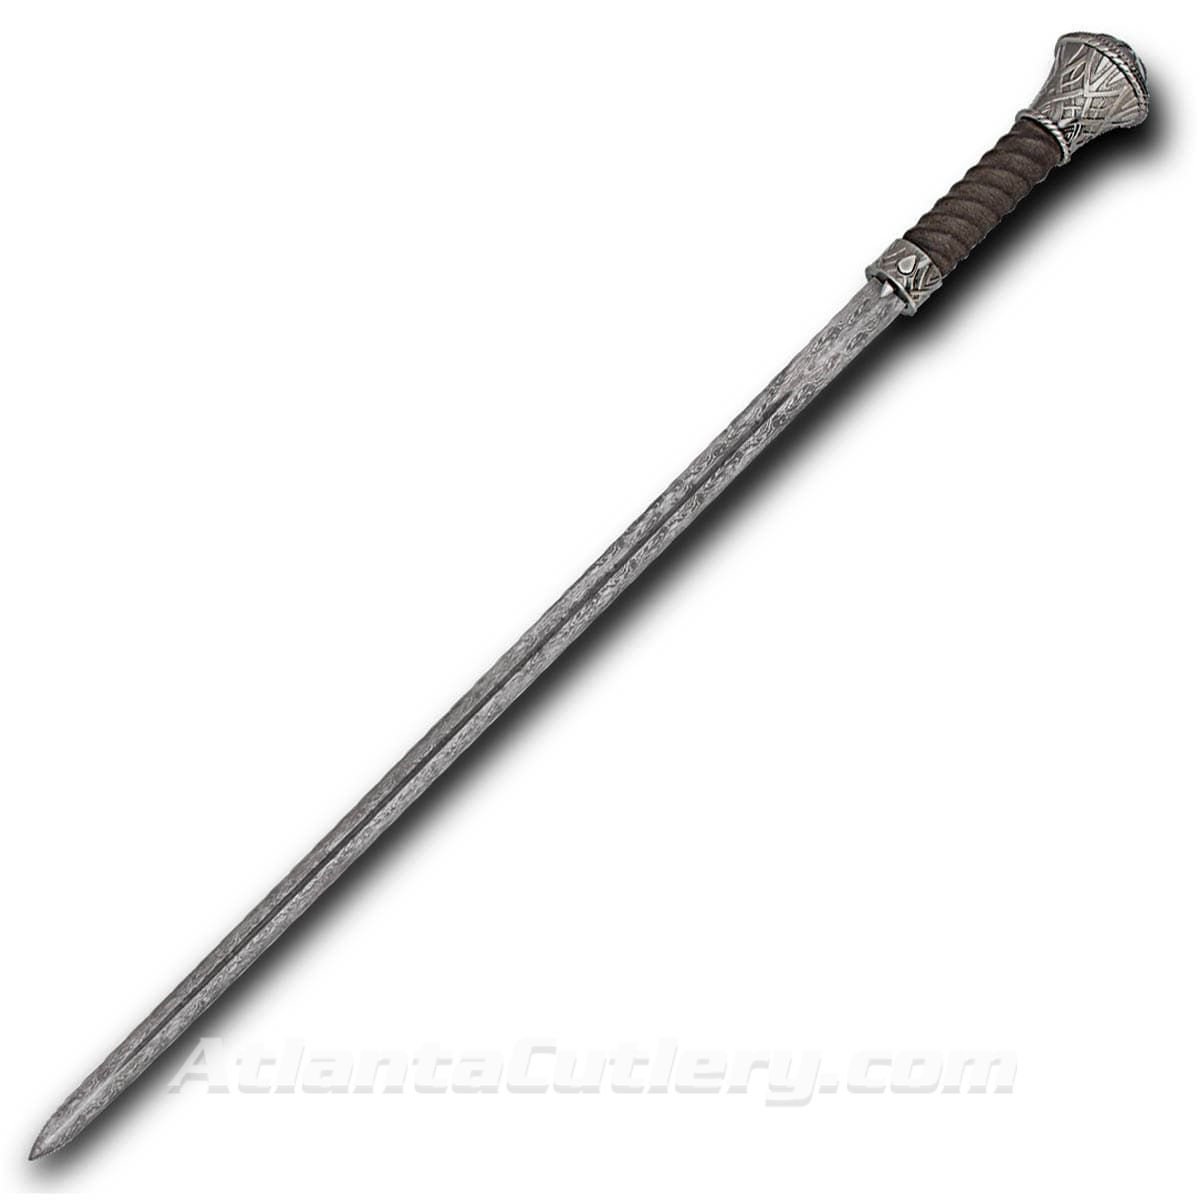 Sharp double-edged Damascus blade on Shikoto sword cane has release/locking mechanism and intricately detailed cast pommel